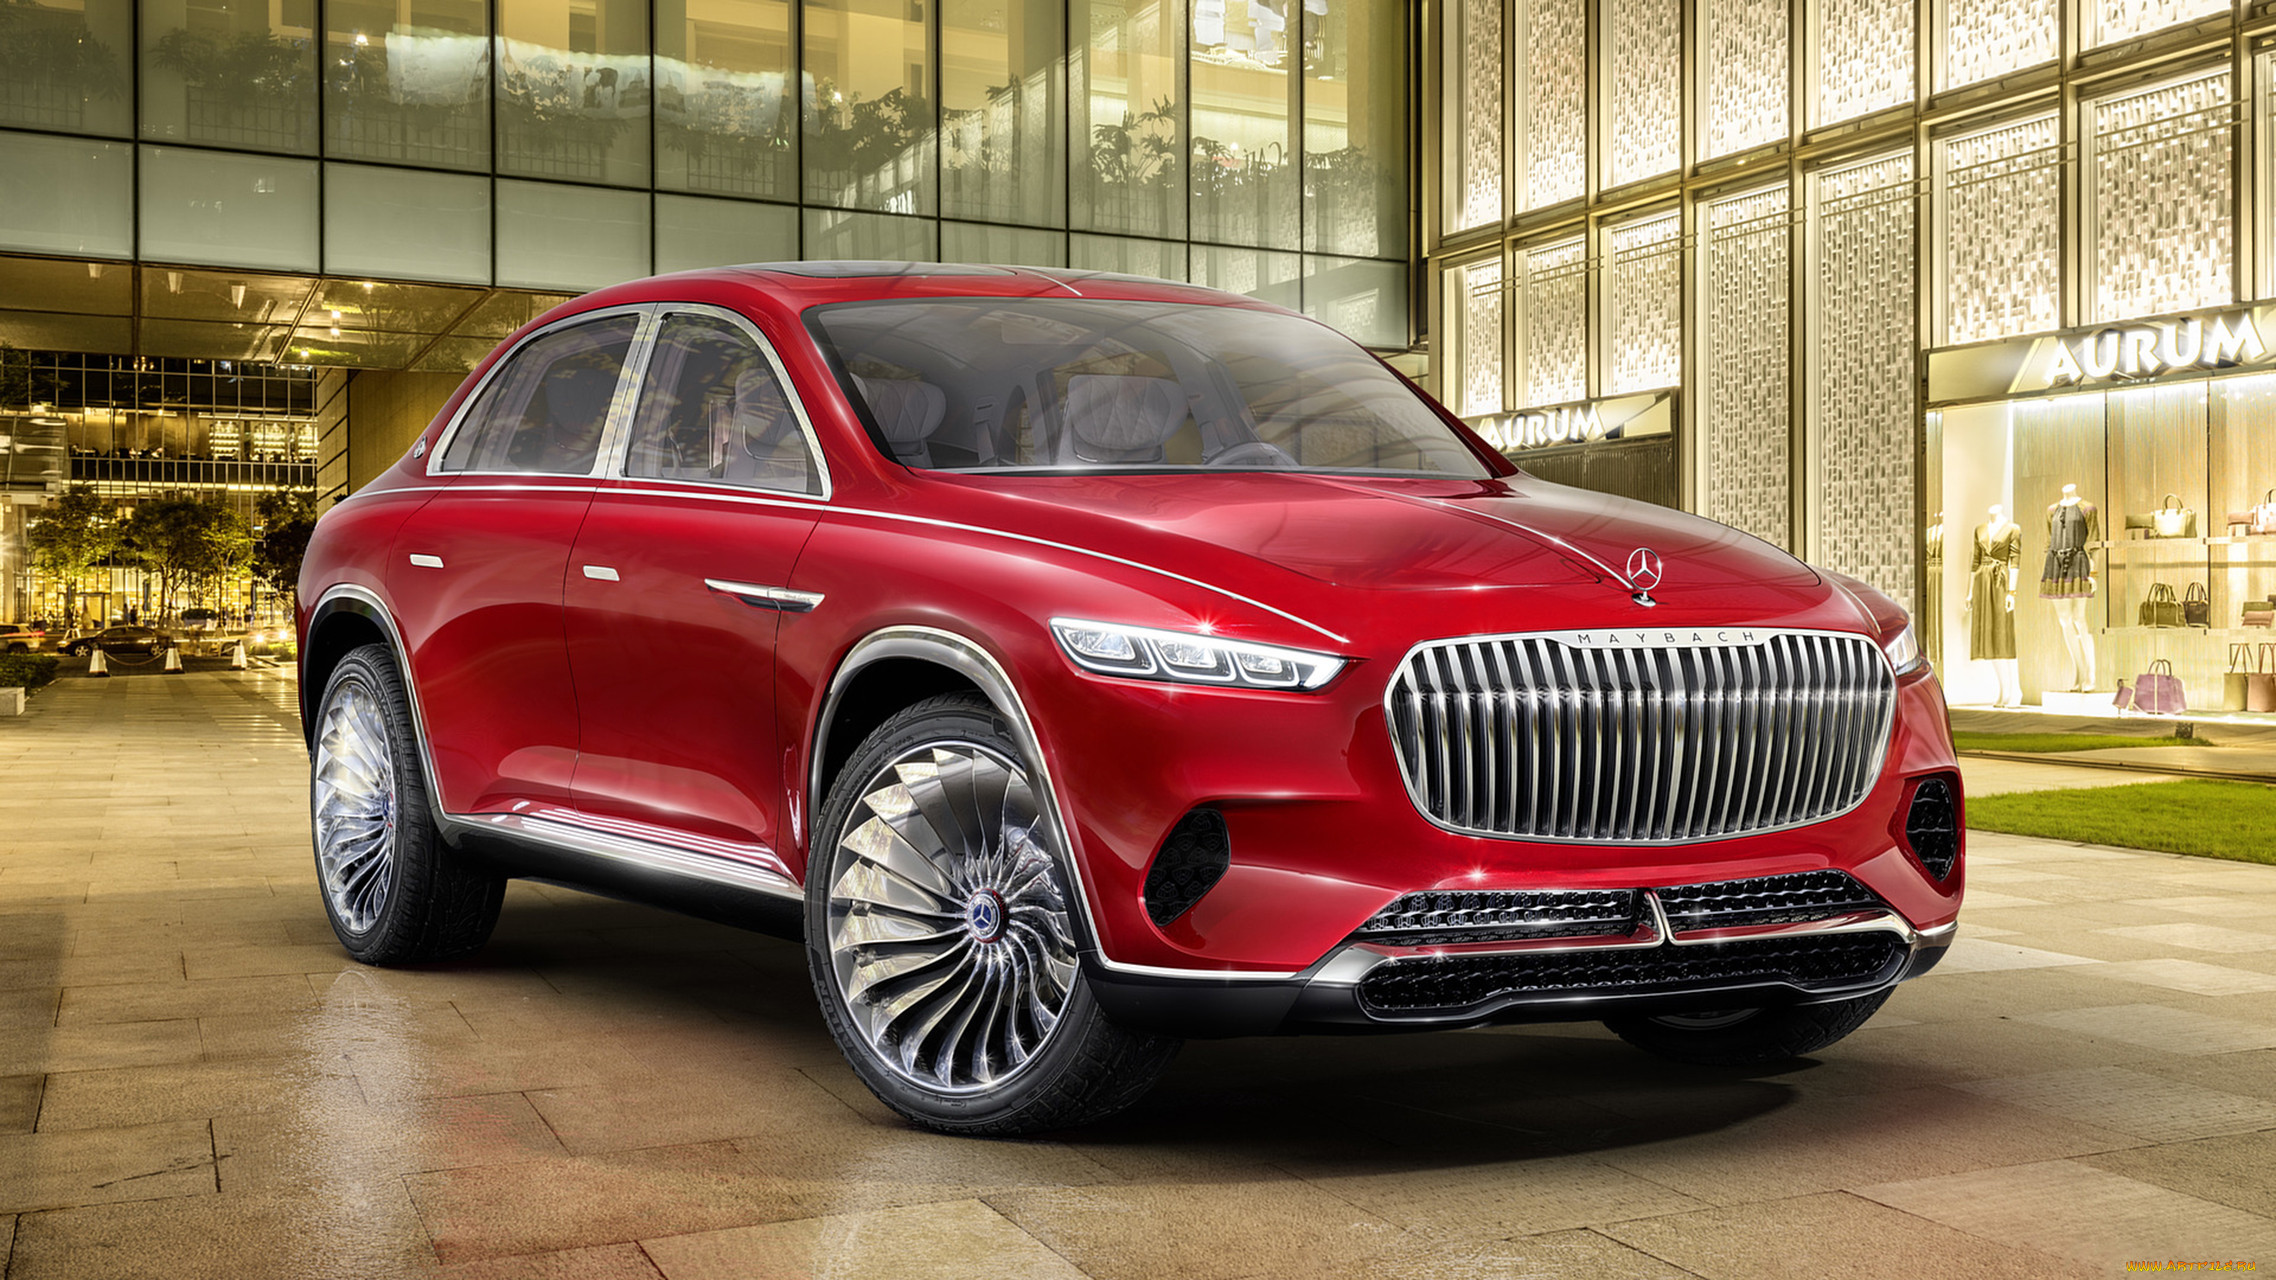 mercedes-maybach vision ultimate luxury suv concept 2018, , mercedes-benz, concept, suv, luxury, ultimate, vision, mercedes-maybach, 2018